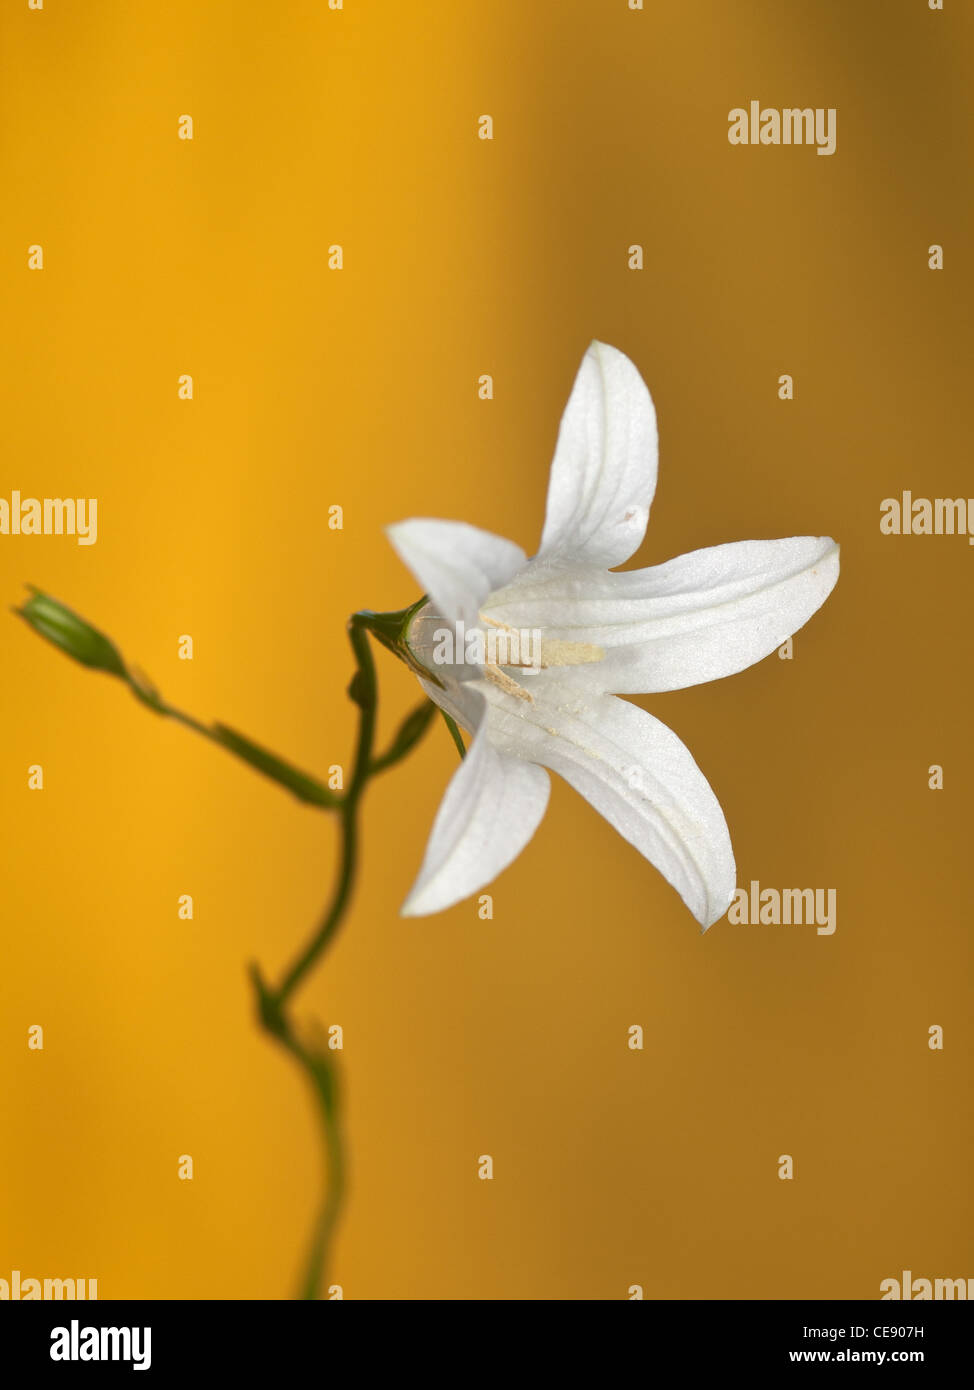 Bellflower, Campanula patula, portrait of white flower with nice out of focus background. Stock Photo